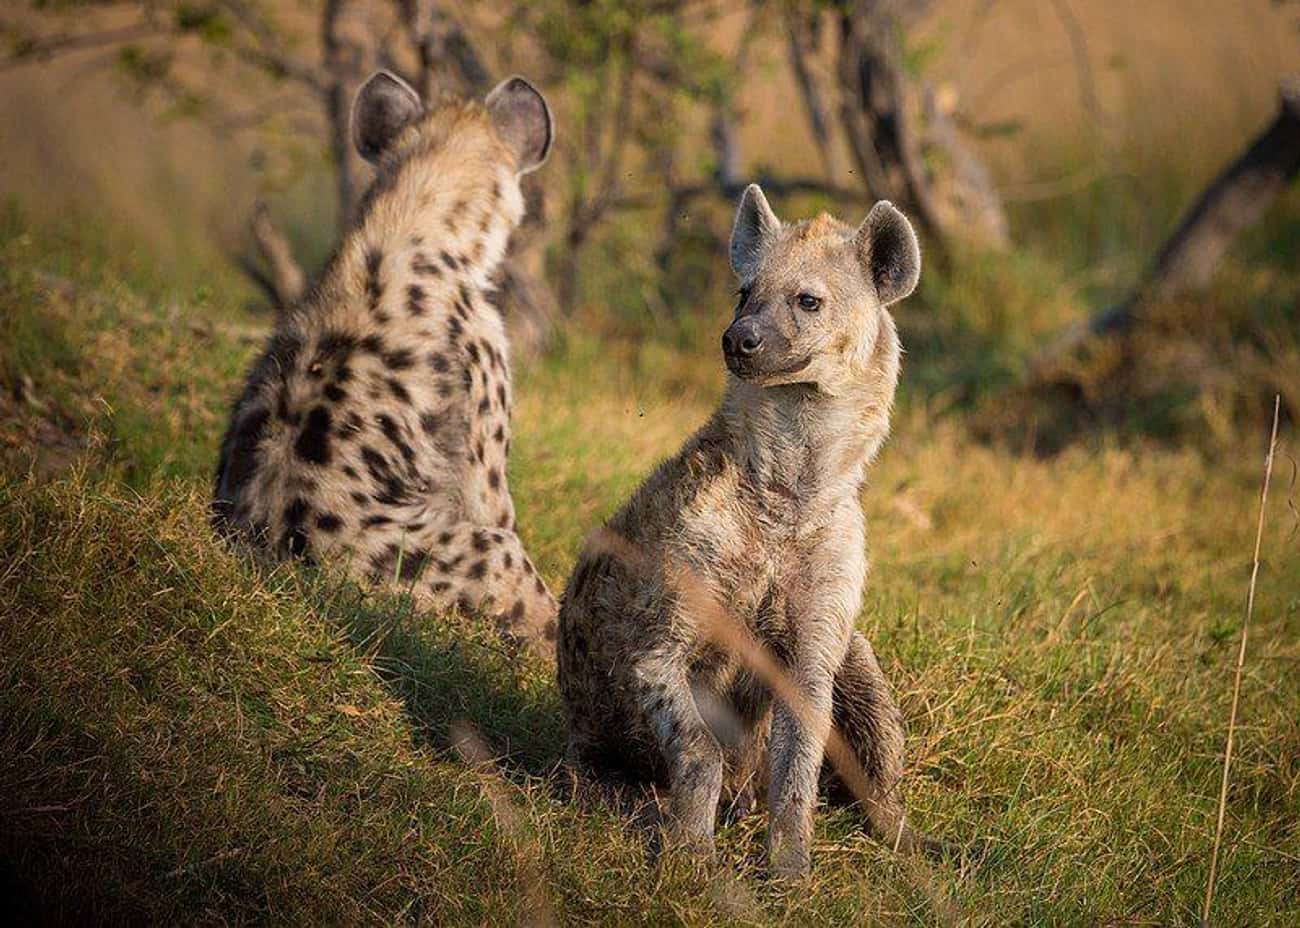 Female Spotted Hyenas Have Functional Penises